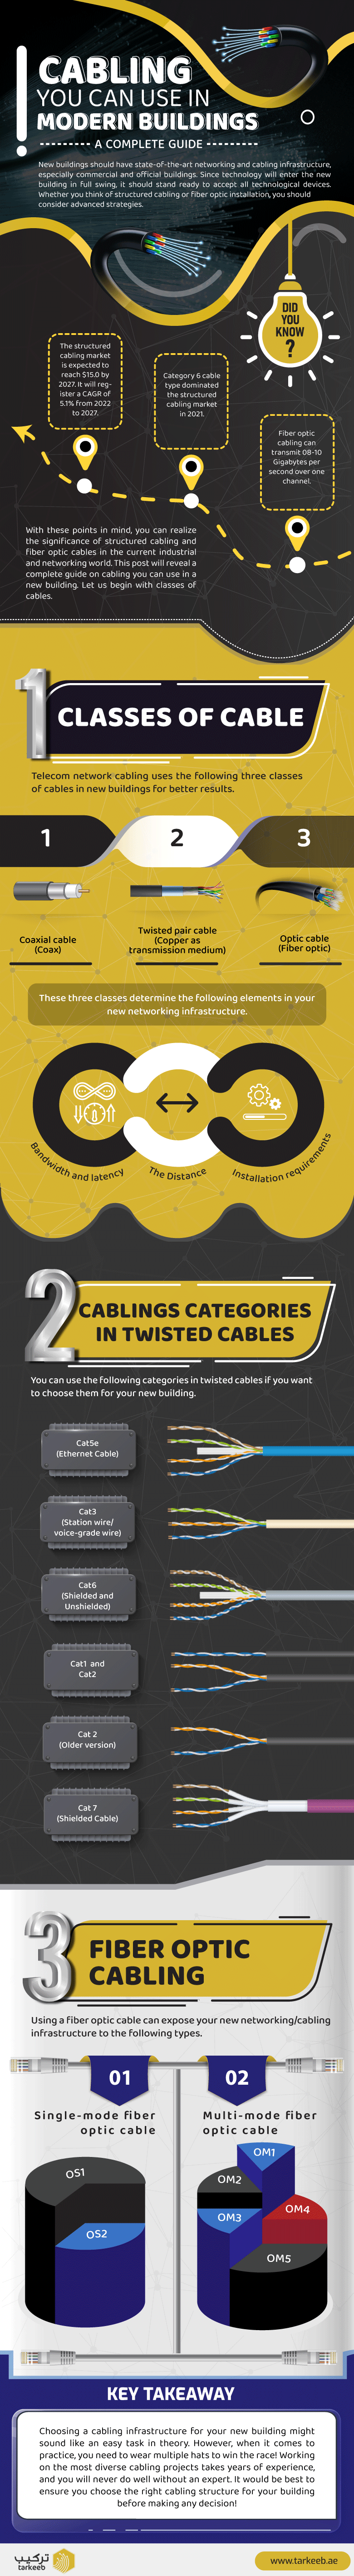 Cabling you can use in modern buildings